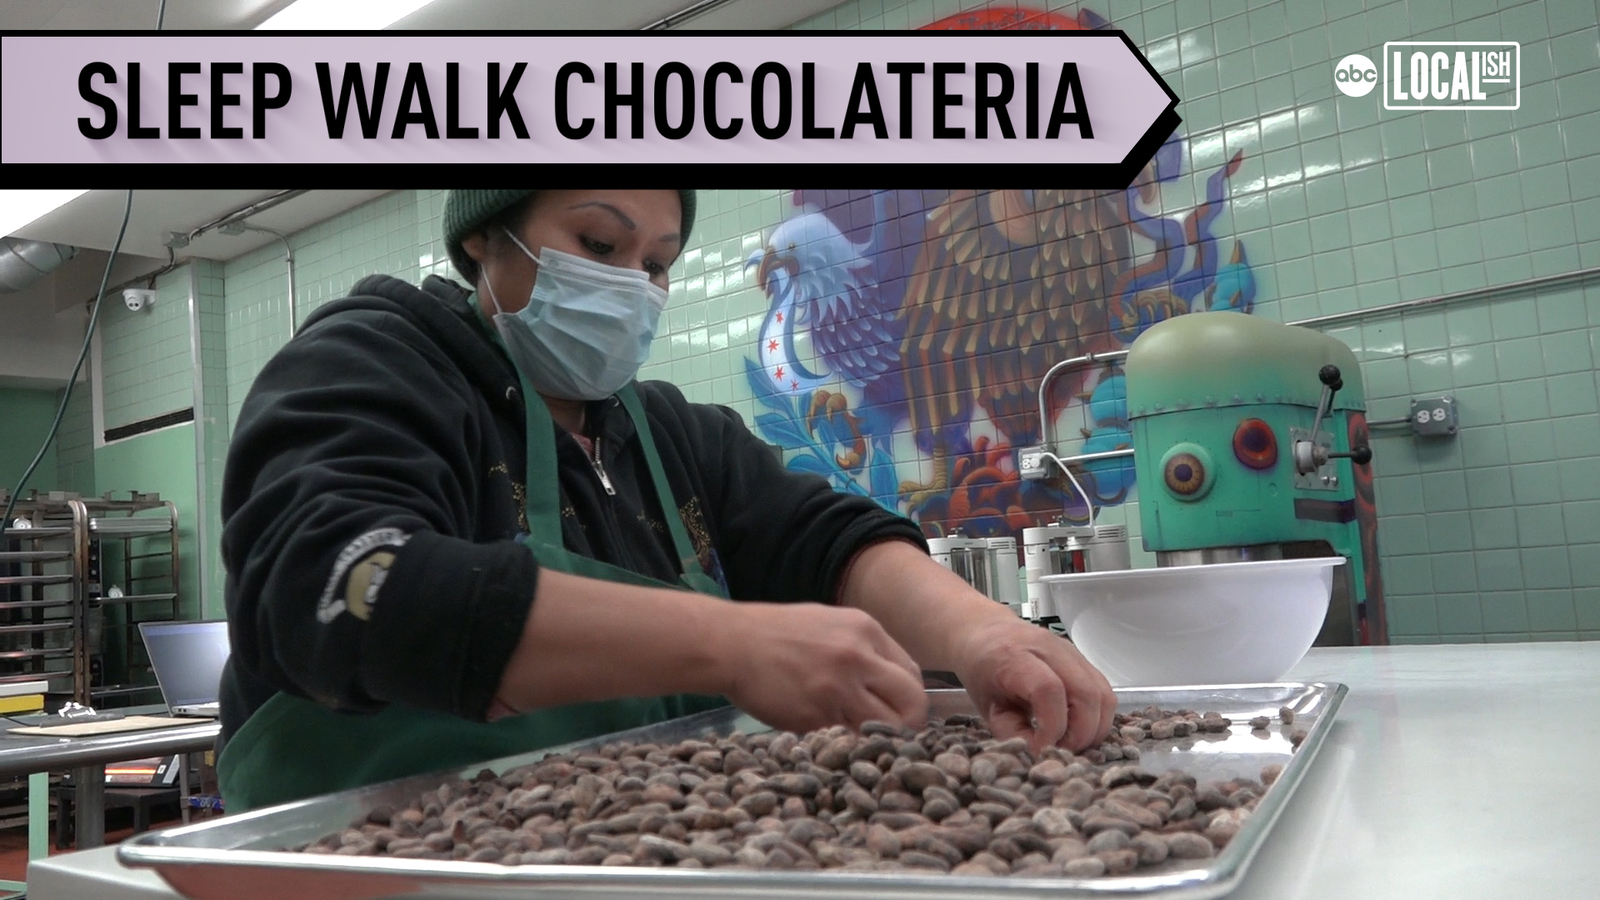 Dark Matter Coffee’s Sleep Walk Chocolateria offers sweets made from authentic Mexica…